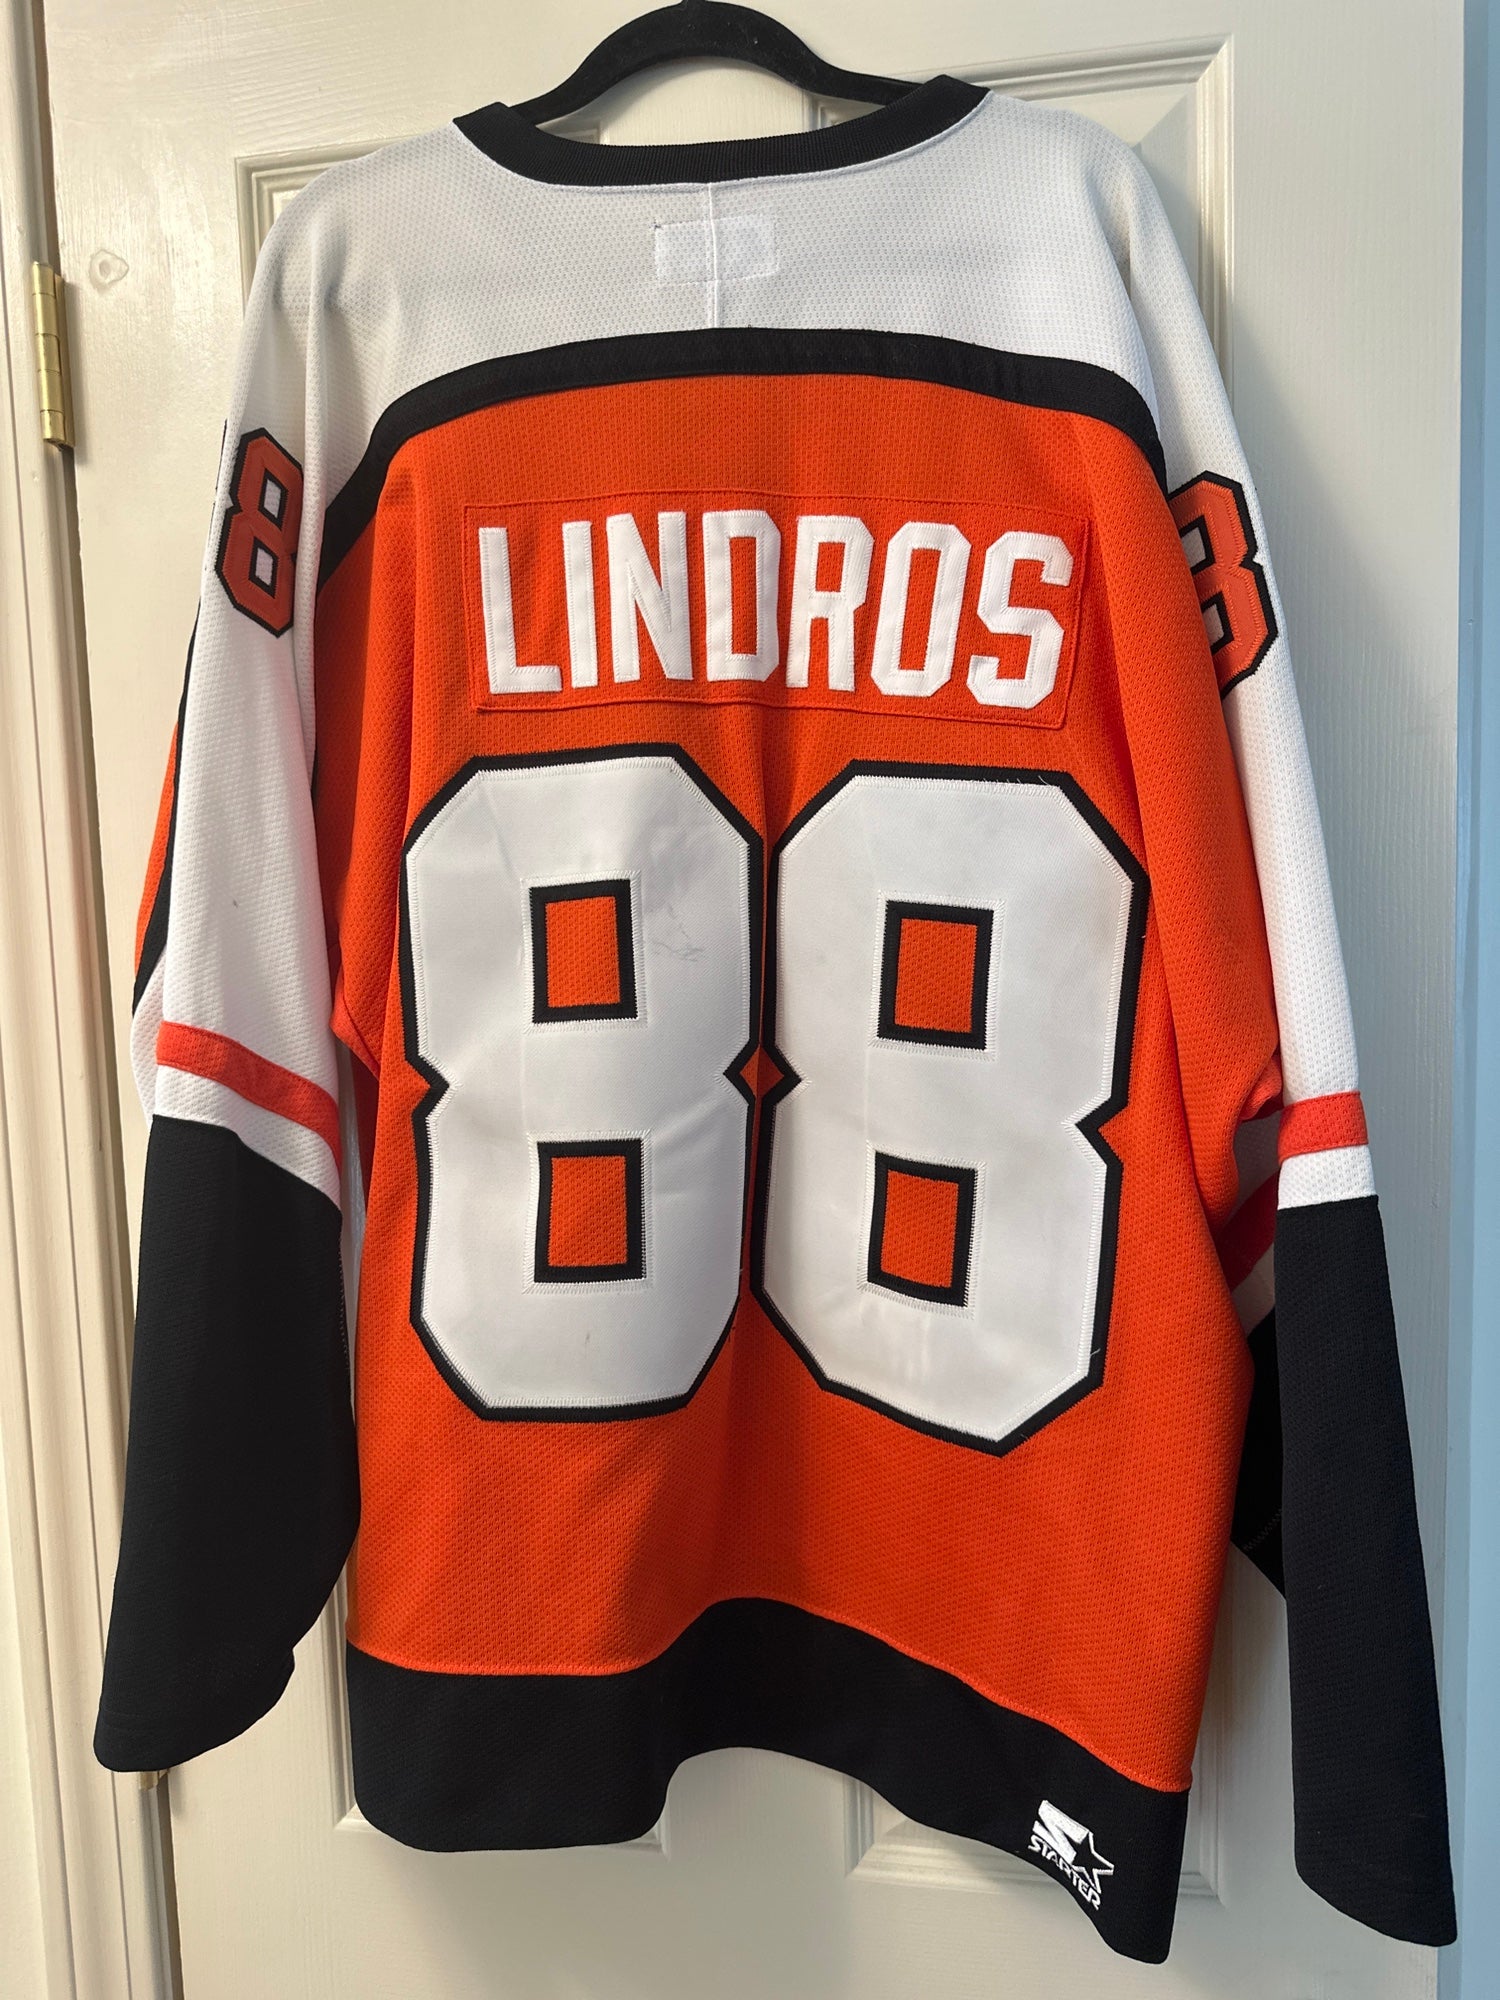 Eric Lindros Autographed Philadelphia Flyers Jersey - NHL Auctions